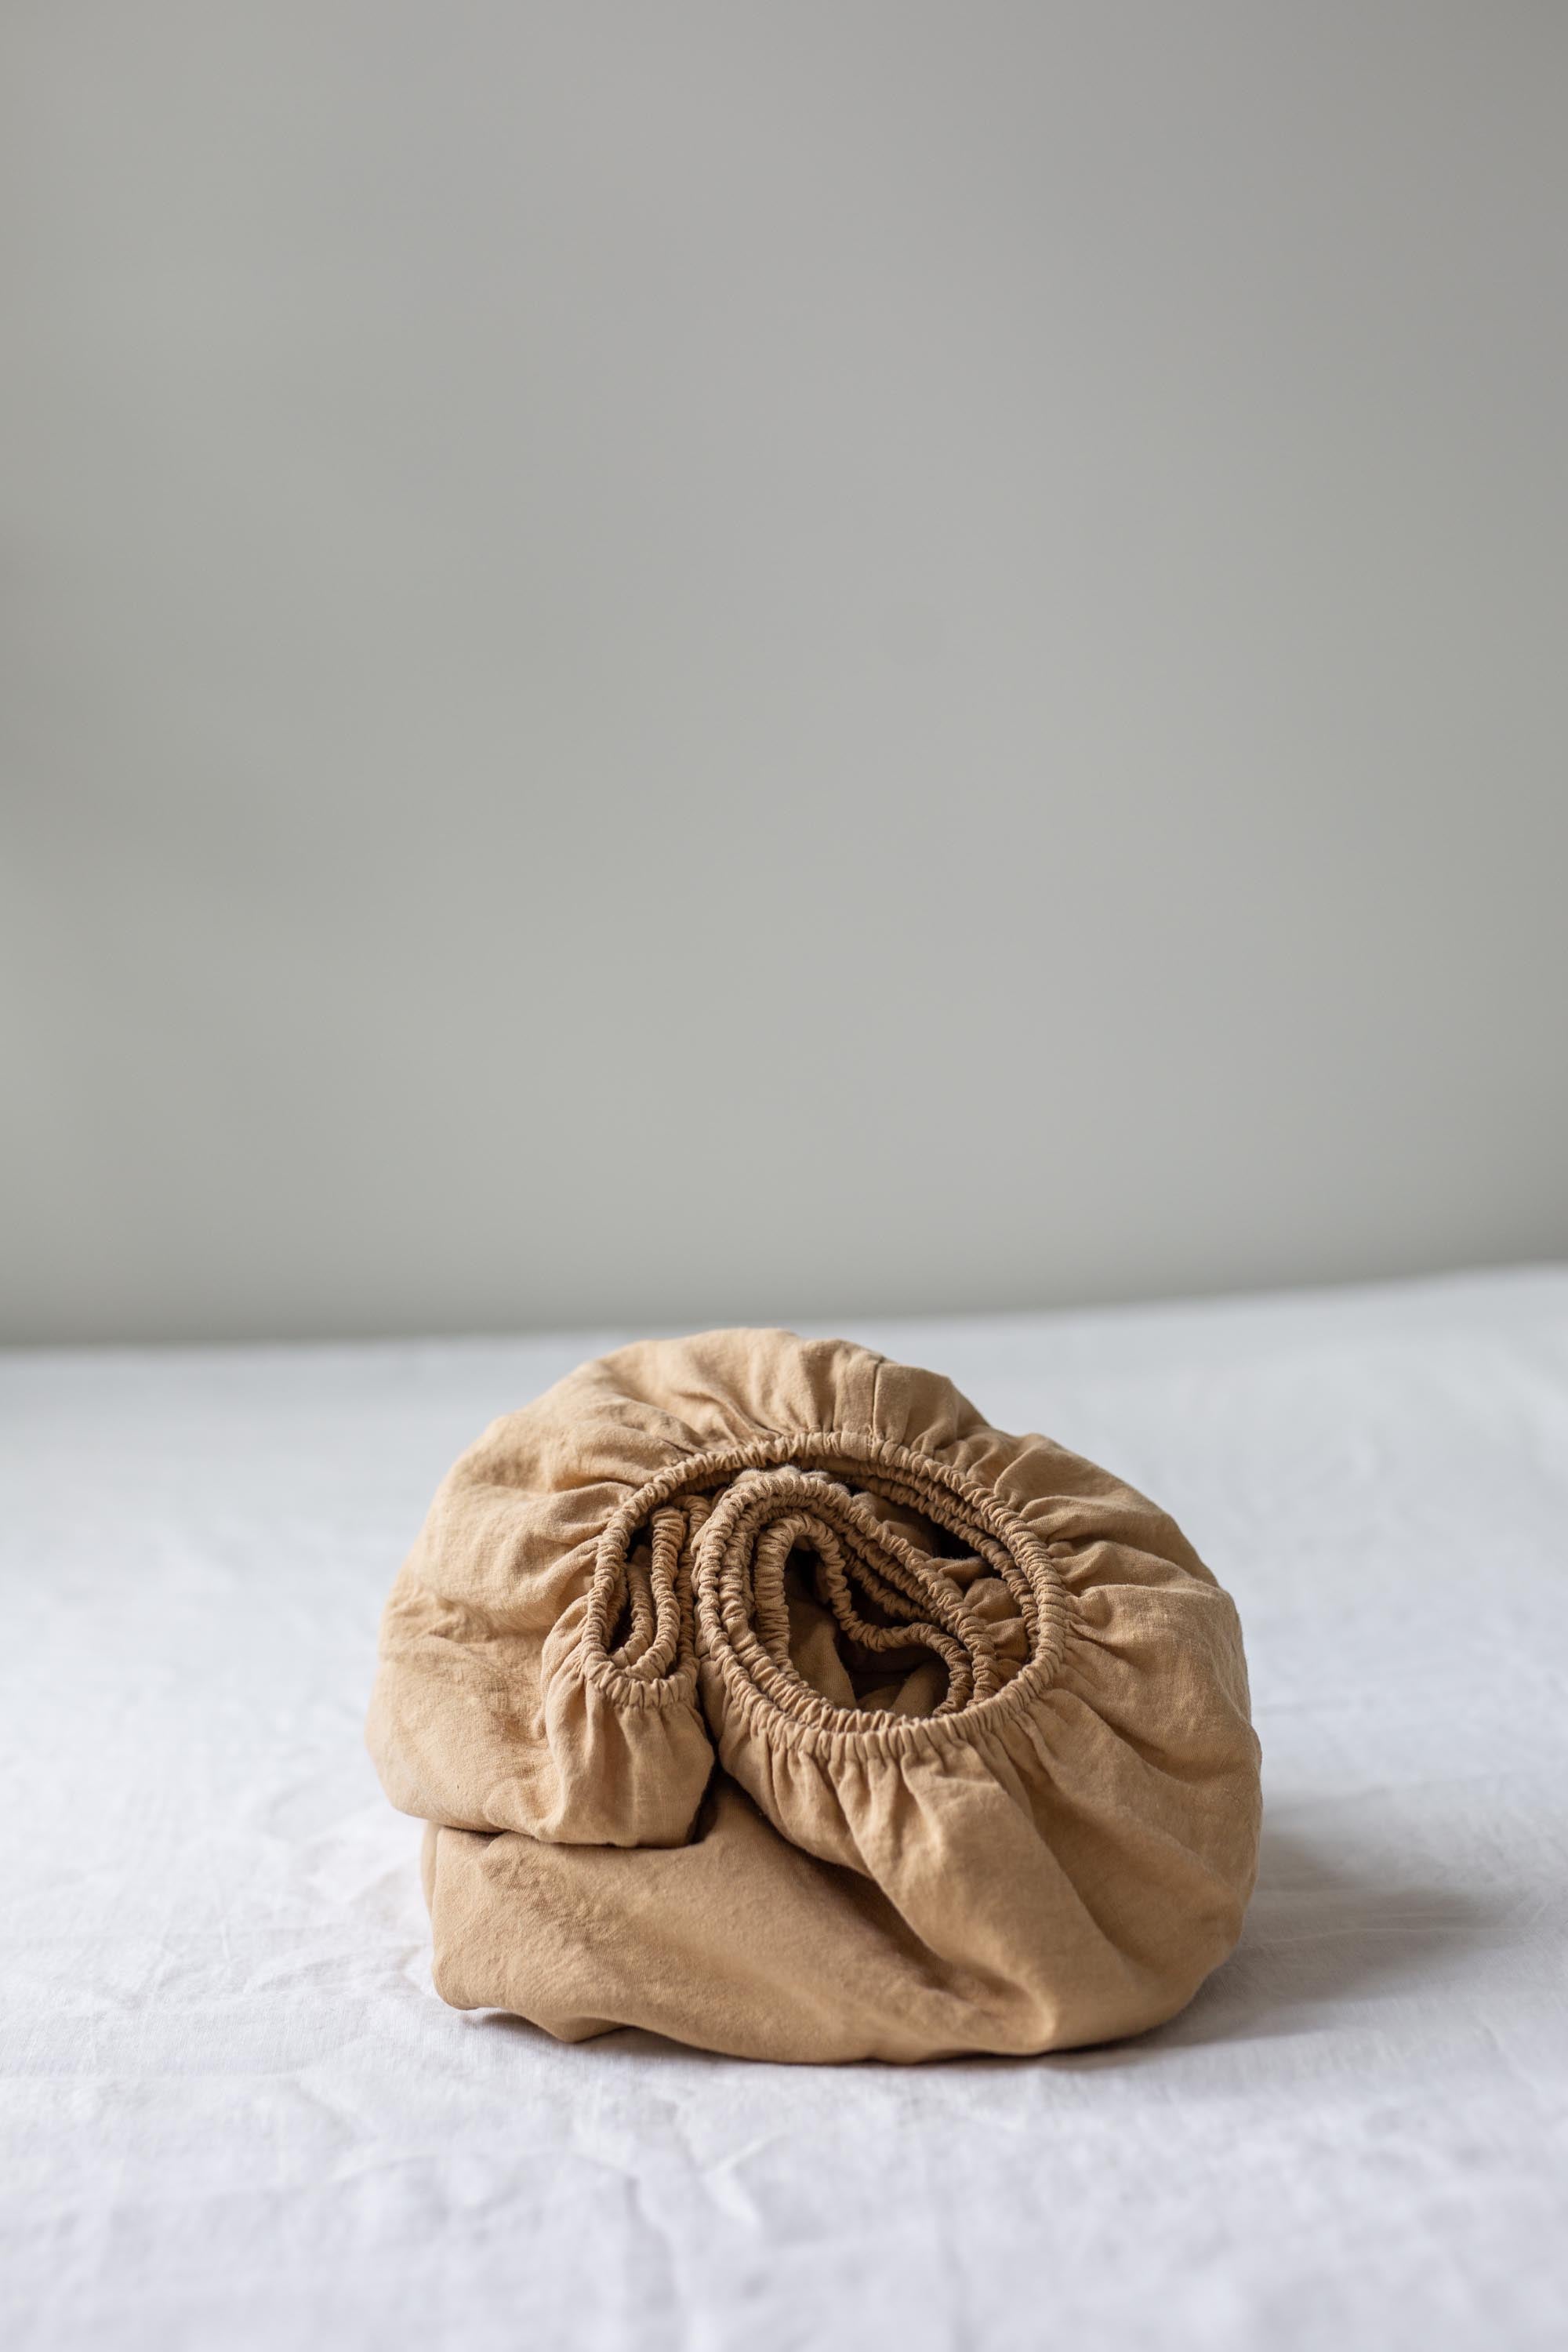 Linen Fitted Sheets In Mustard By AmourlInen